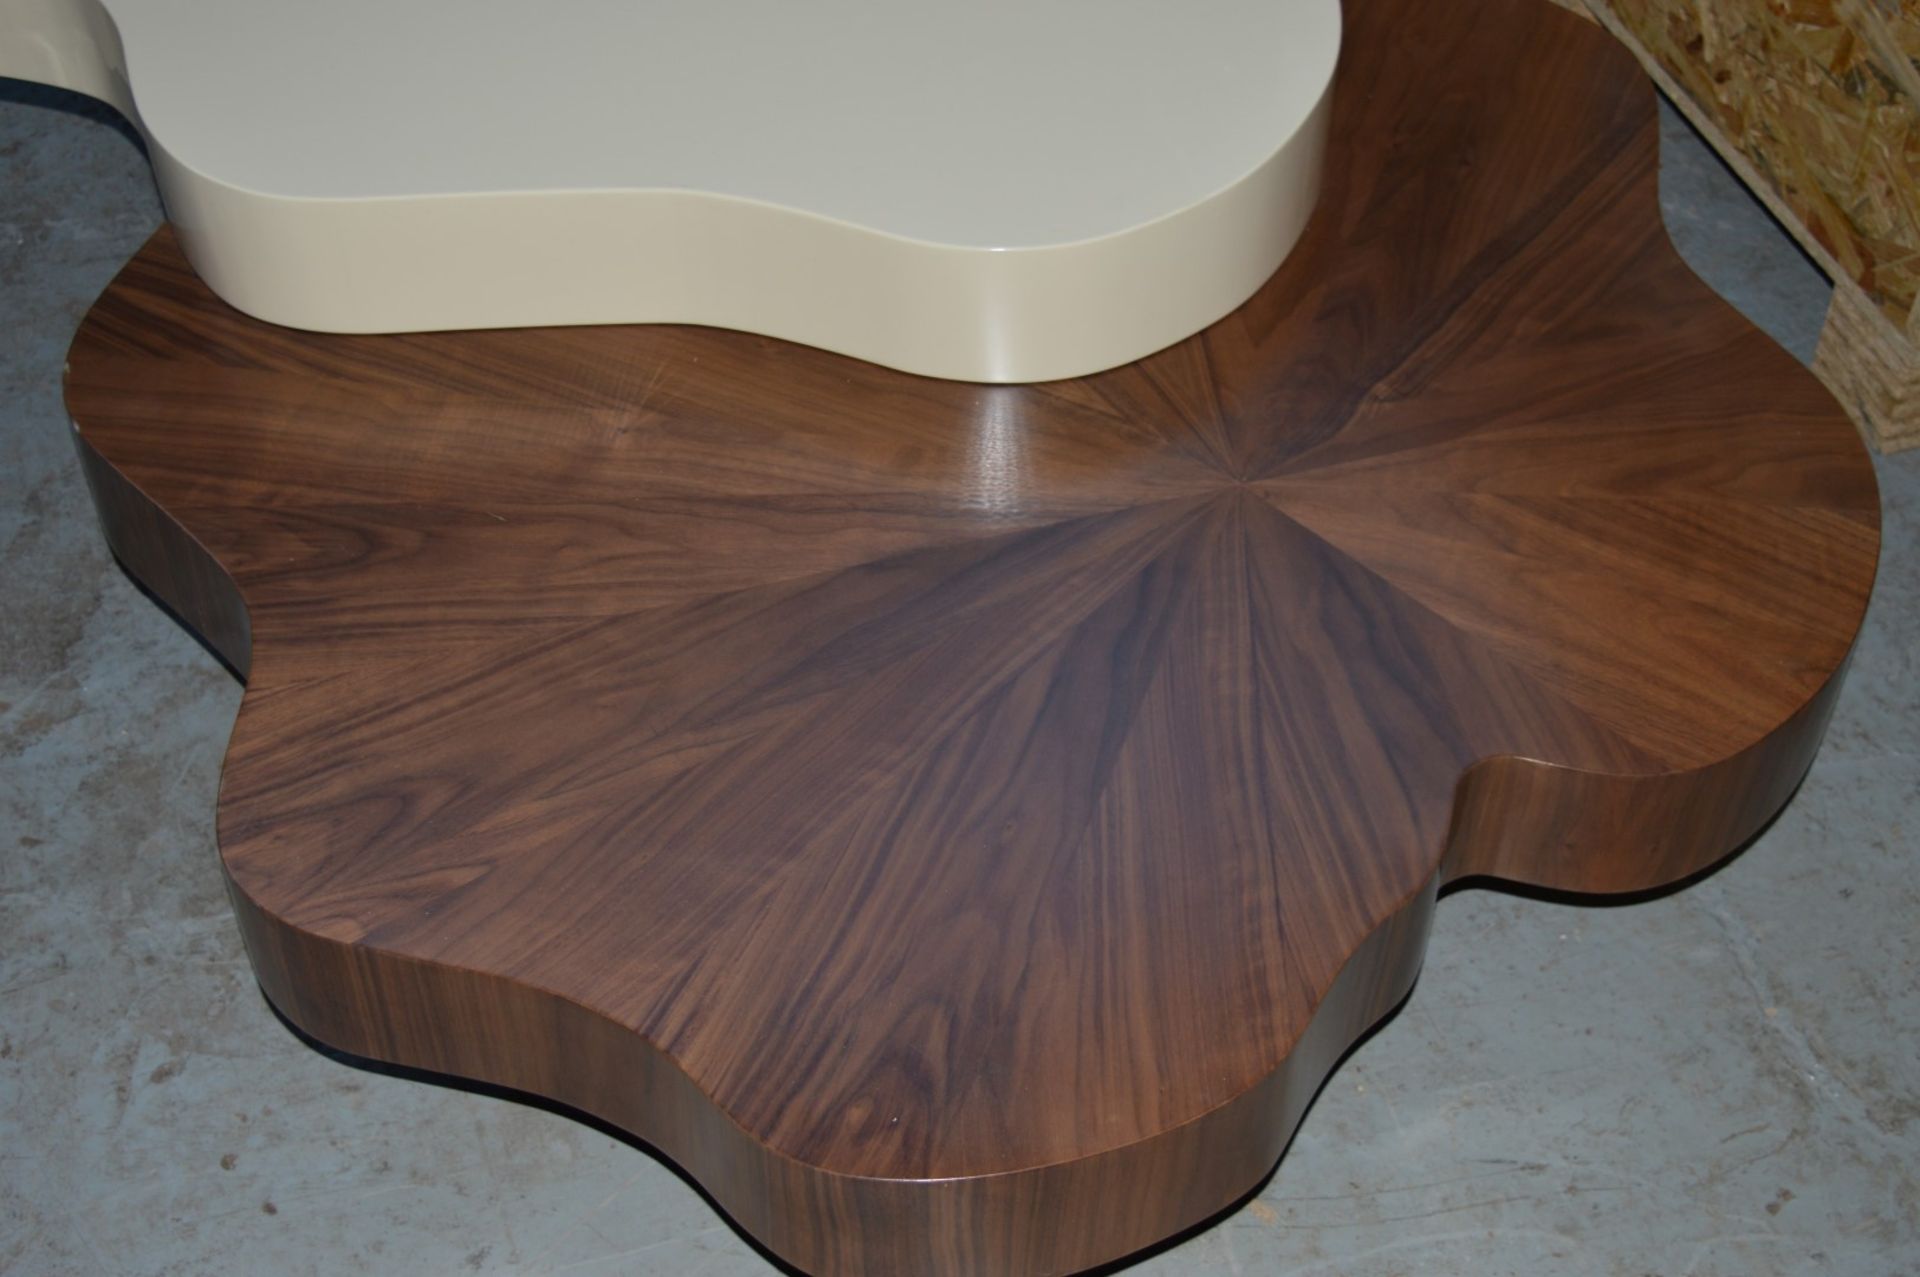 1 x Ginger & Jagger Nenhuphar Coffee Table - Urbanmint Design - Eye Catching Design - Walnut and - Image 12 of 15